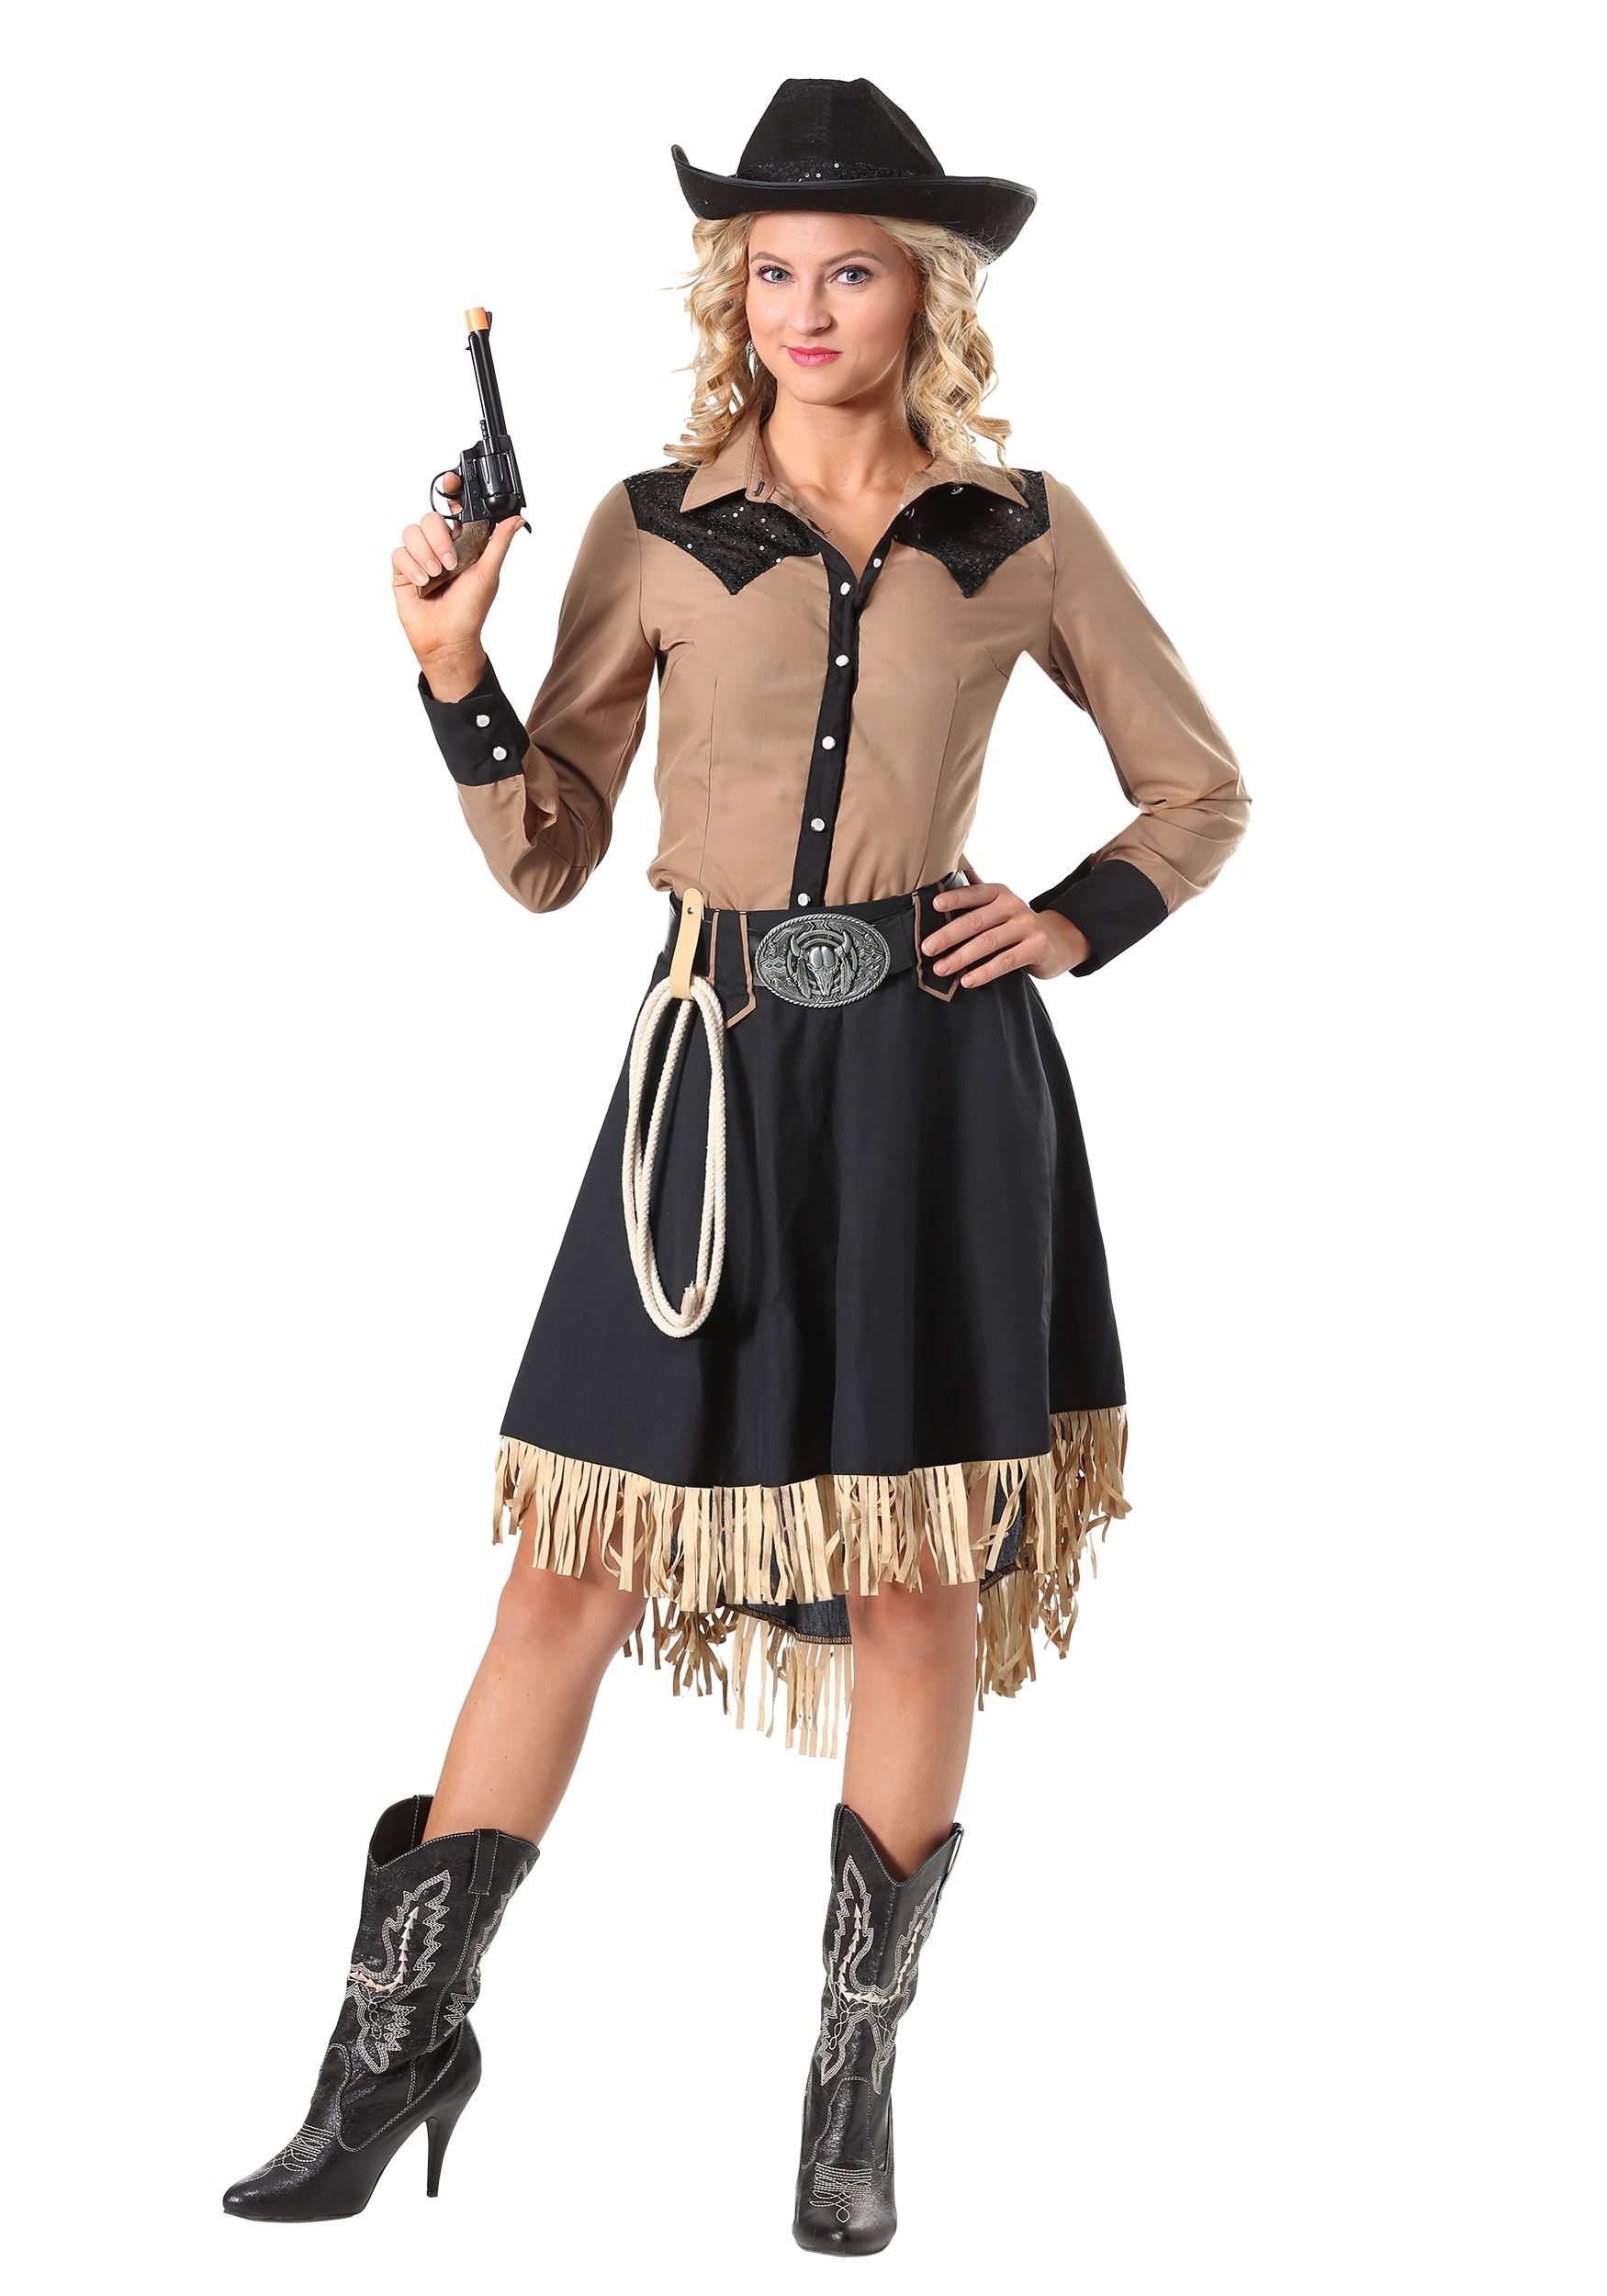 Lasso'n Cowgirl Plus Size Costume for Women